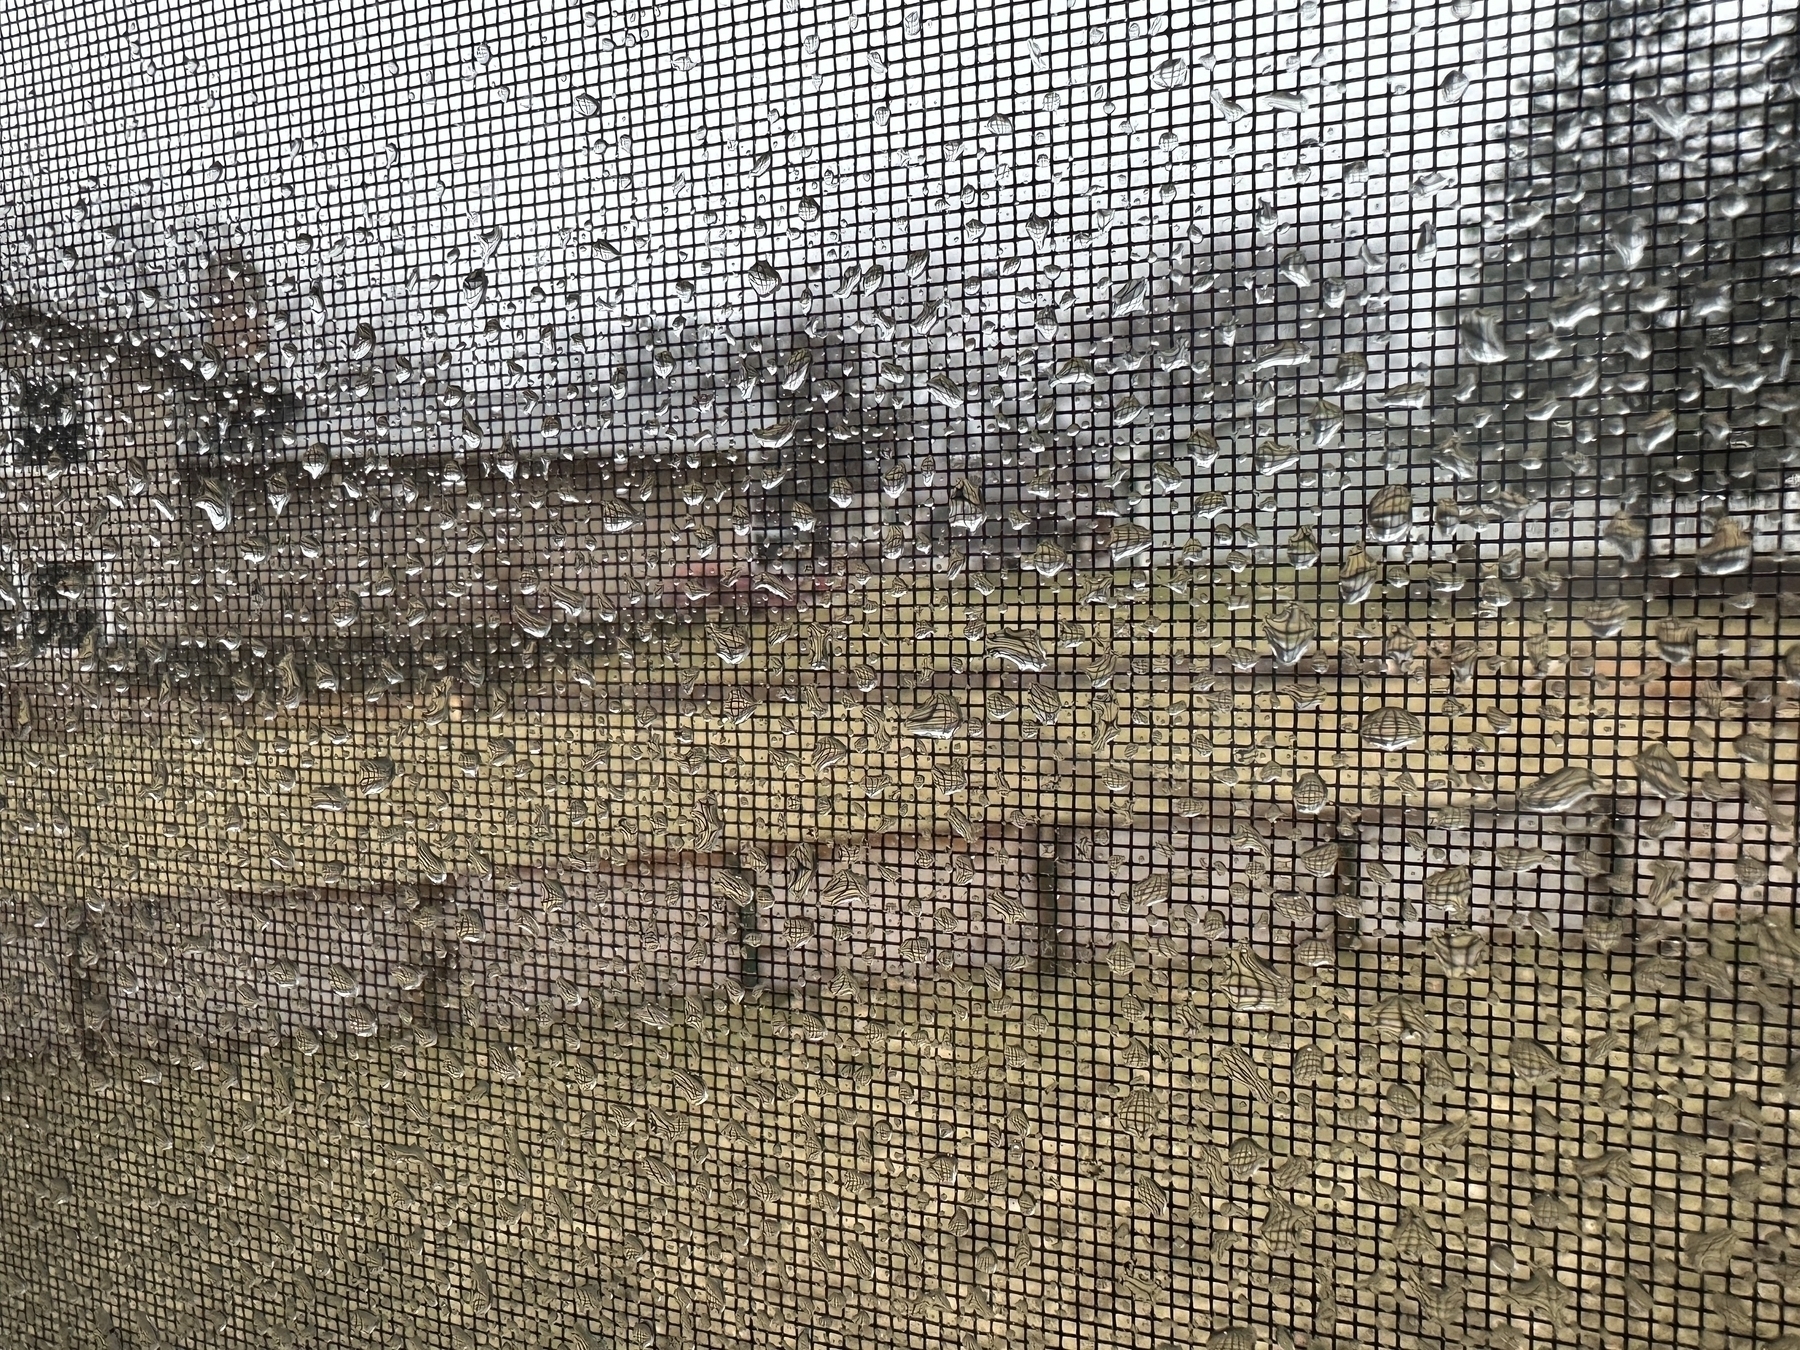 Raindrops cling to a screen, partially obscuring the view of a suburban landscape with a backyard hockey rink, houses and bare trees.